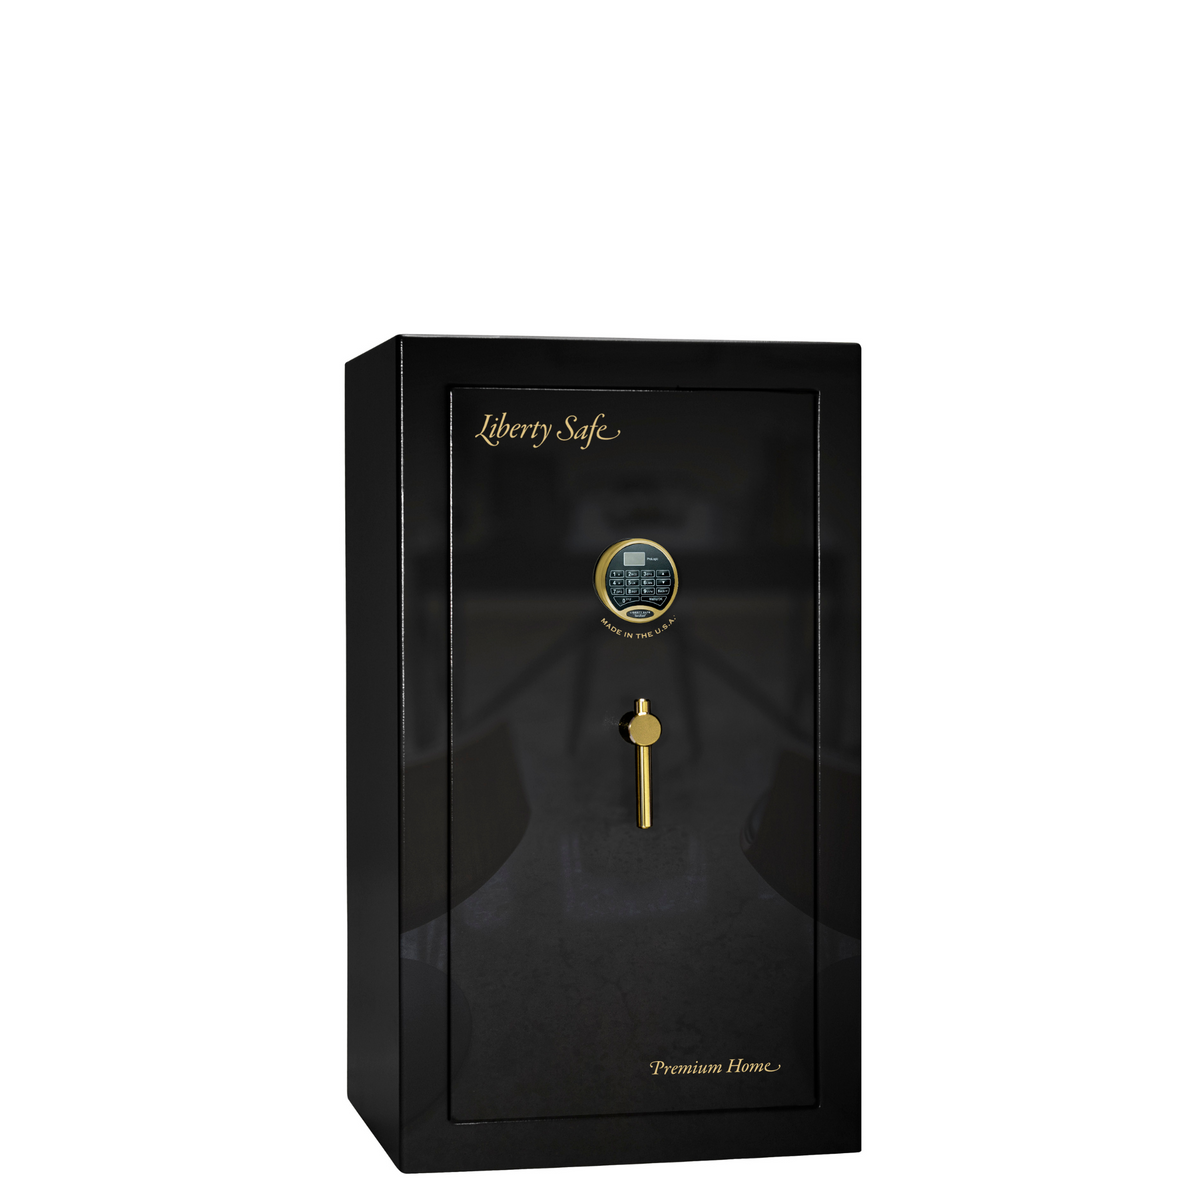 Premium Home Series | Level 7 Security | 2 Hour Fire Protection | 12 | Dimensions: 42&quot;(H) x 24&quot;(W) x 20.25&quot;(D) | Black Gloss Brass - Closed  Door